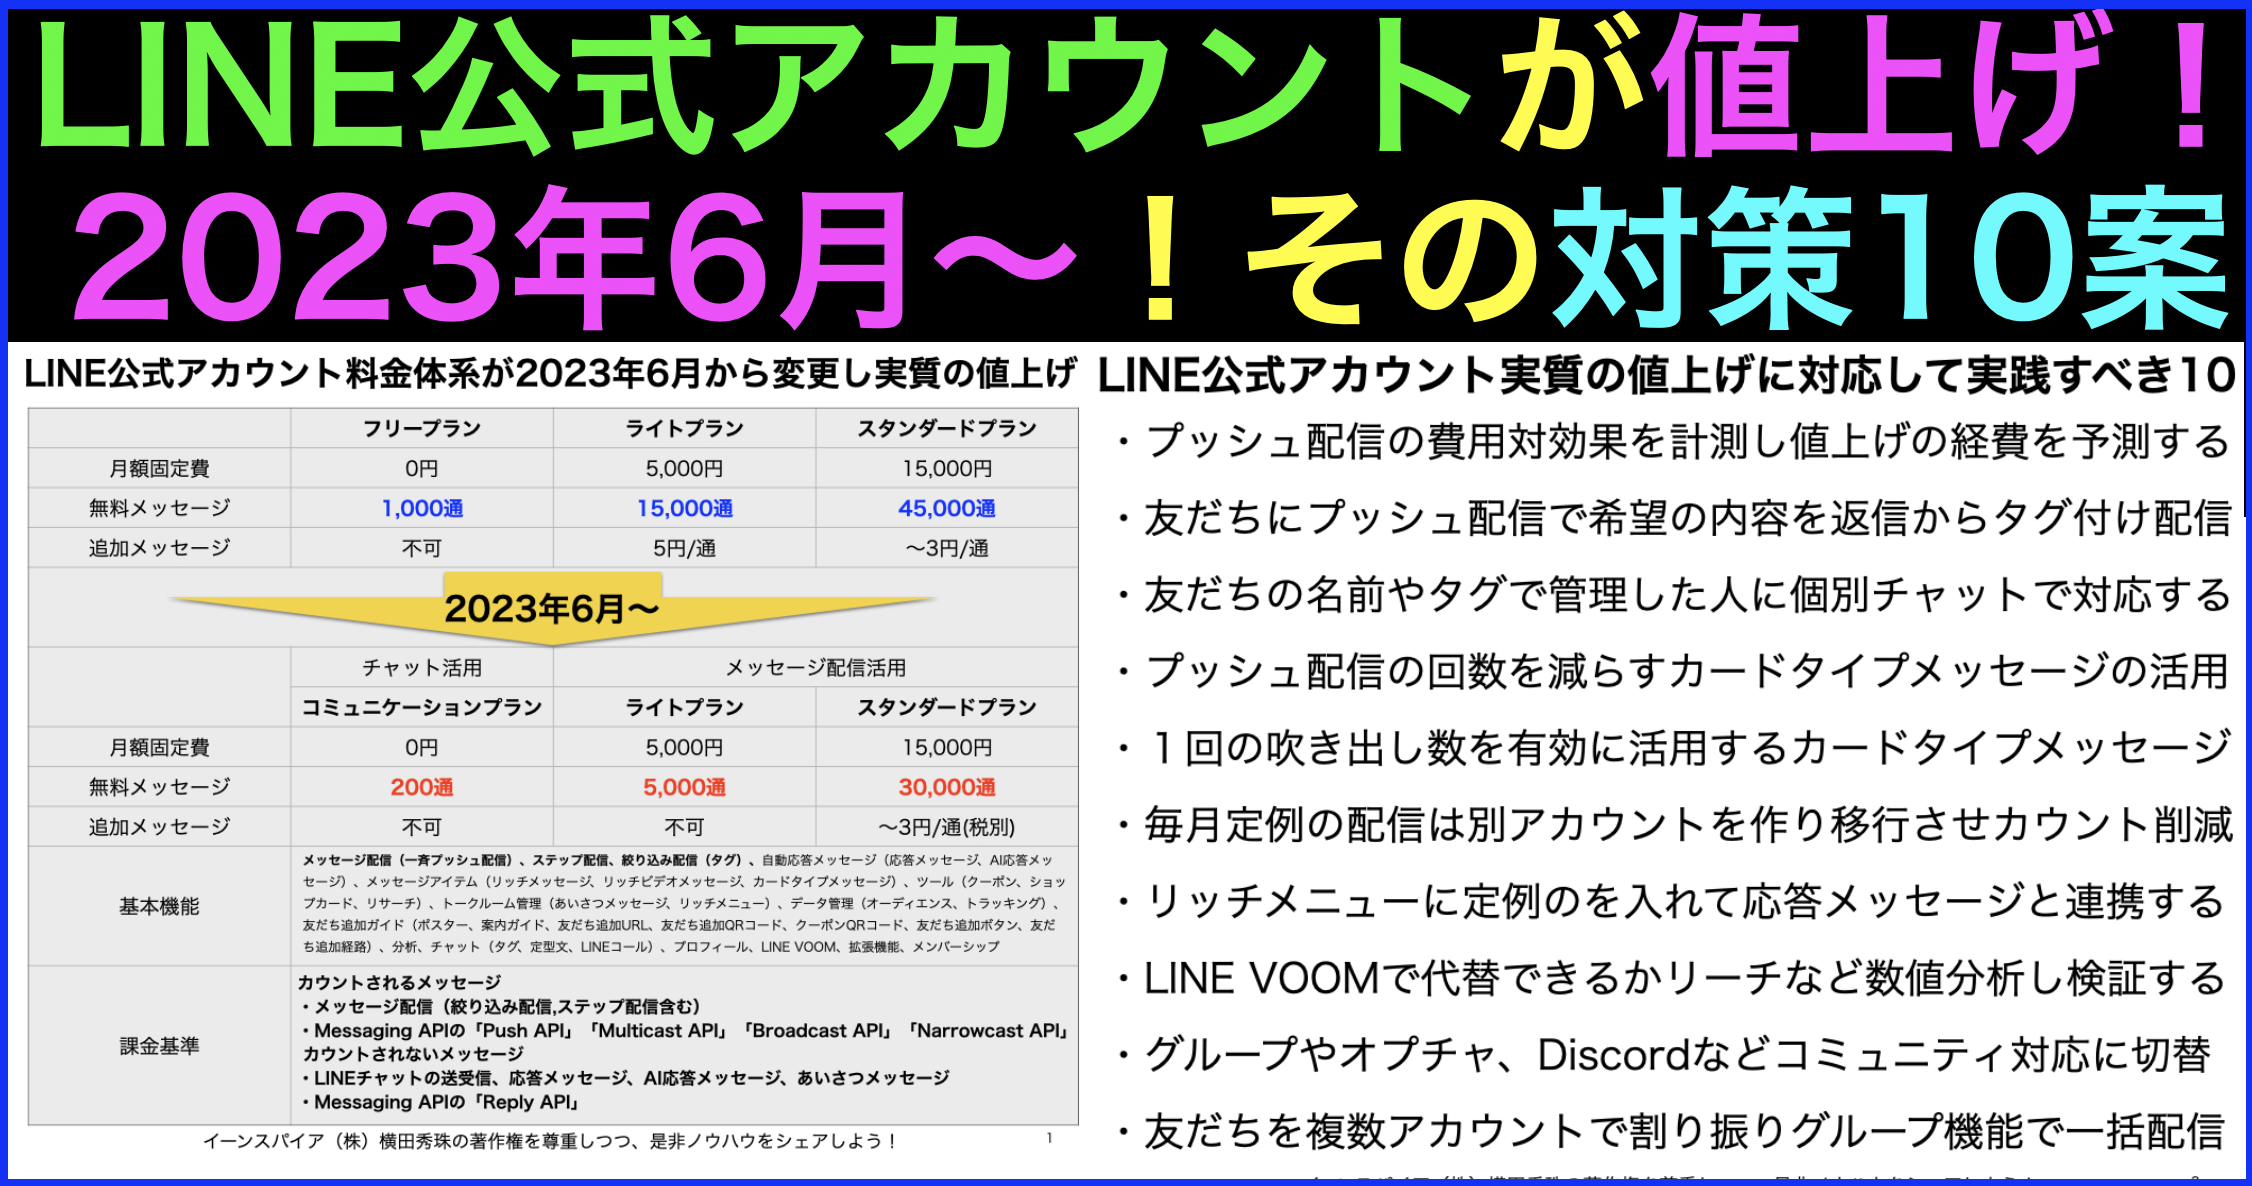 LINE公式アカウント2023年6月〜値上げ！その対抗策10案